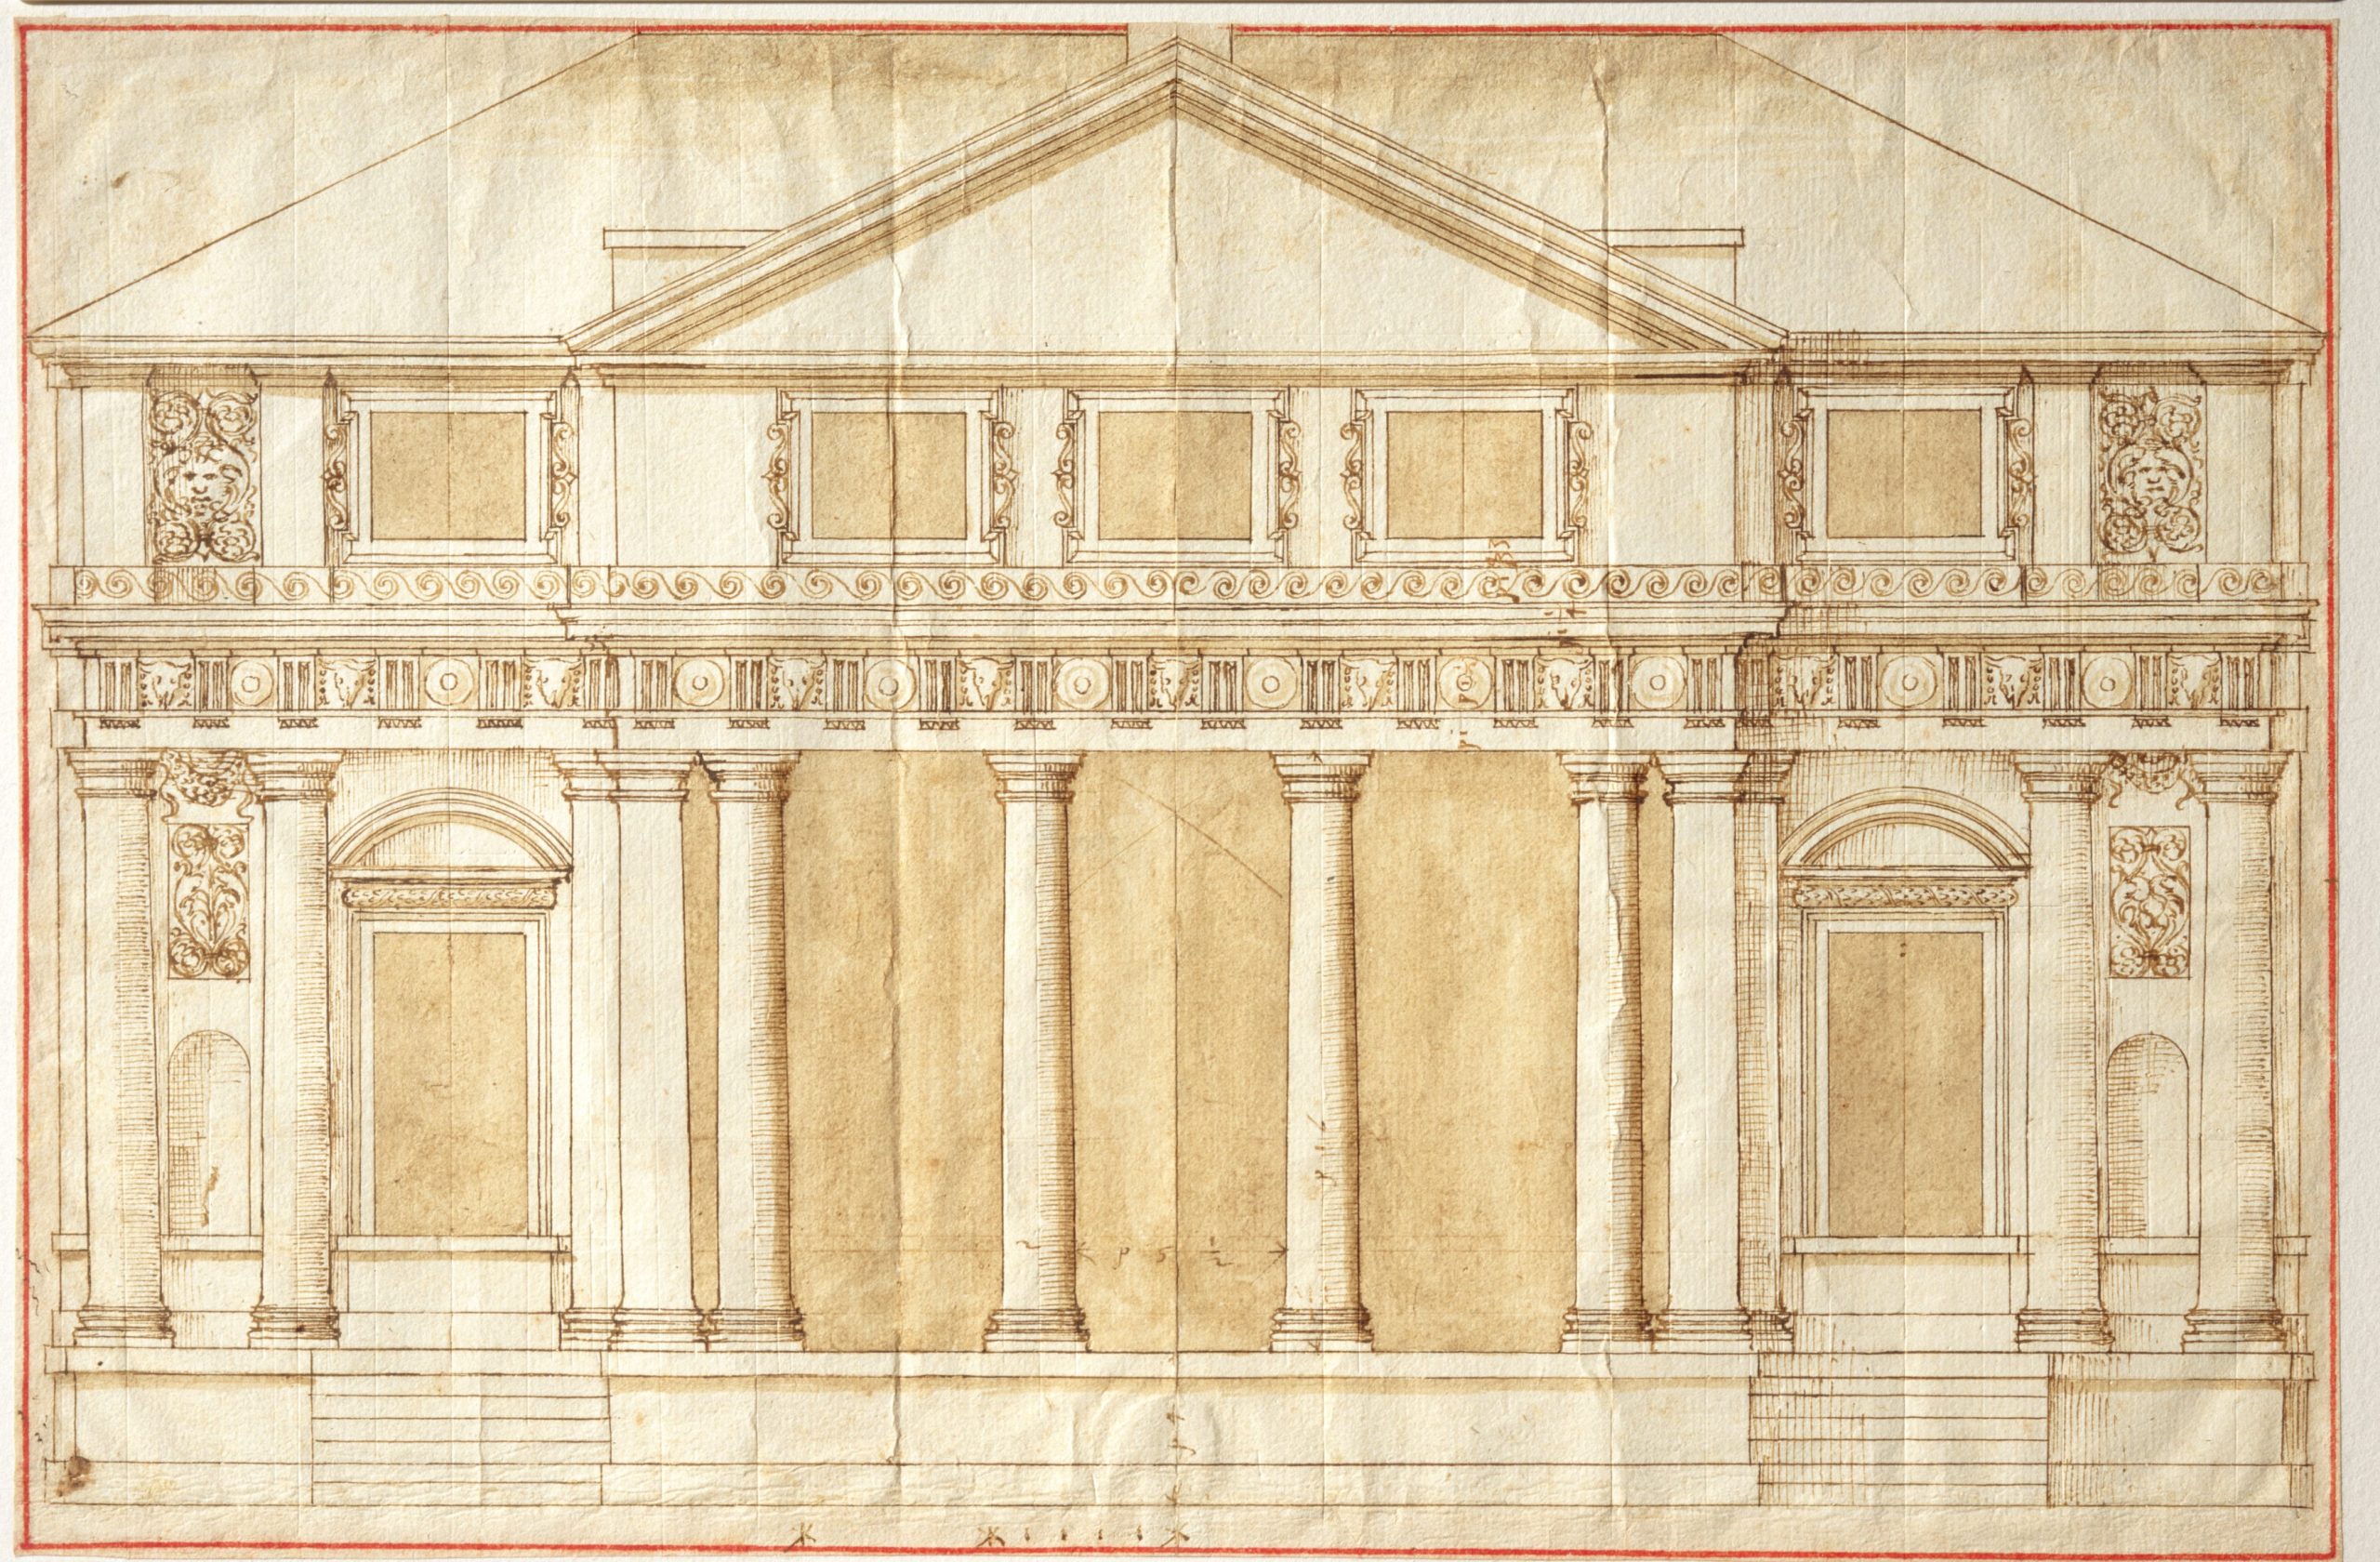 As Howard Burns points out in the exhibit catalog, Palladio’s aim was “to rebuild the cities and restructure the countryside of the Veneto, and by implication, the world.